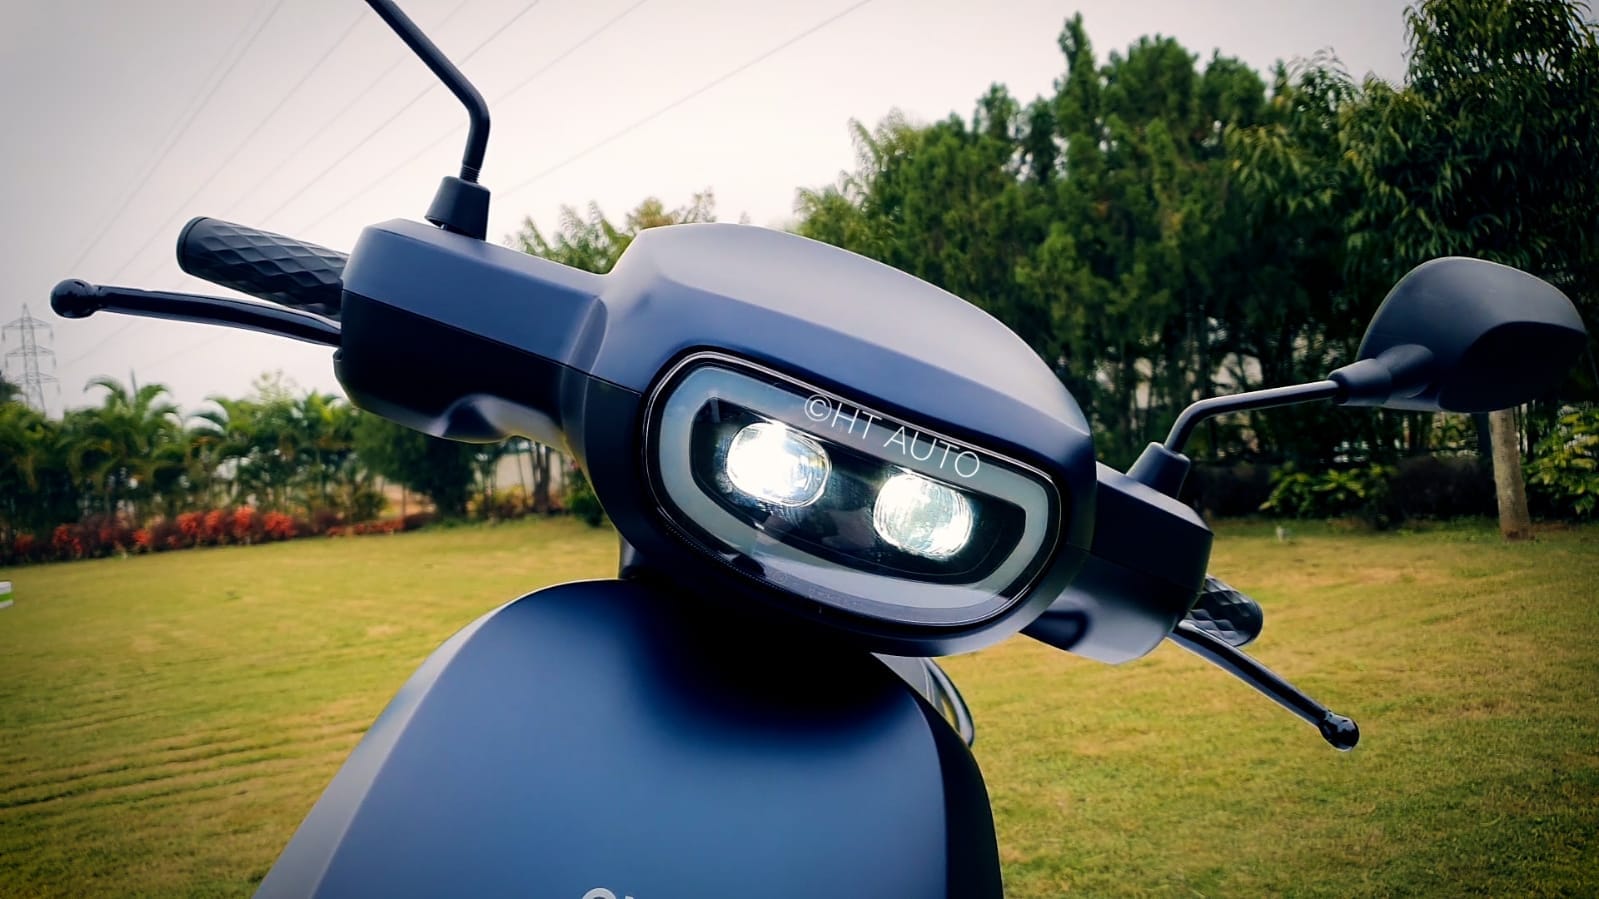 The LED head light unit on the Ola S1 electric scooter.